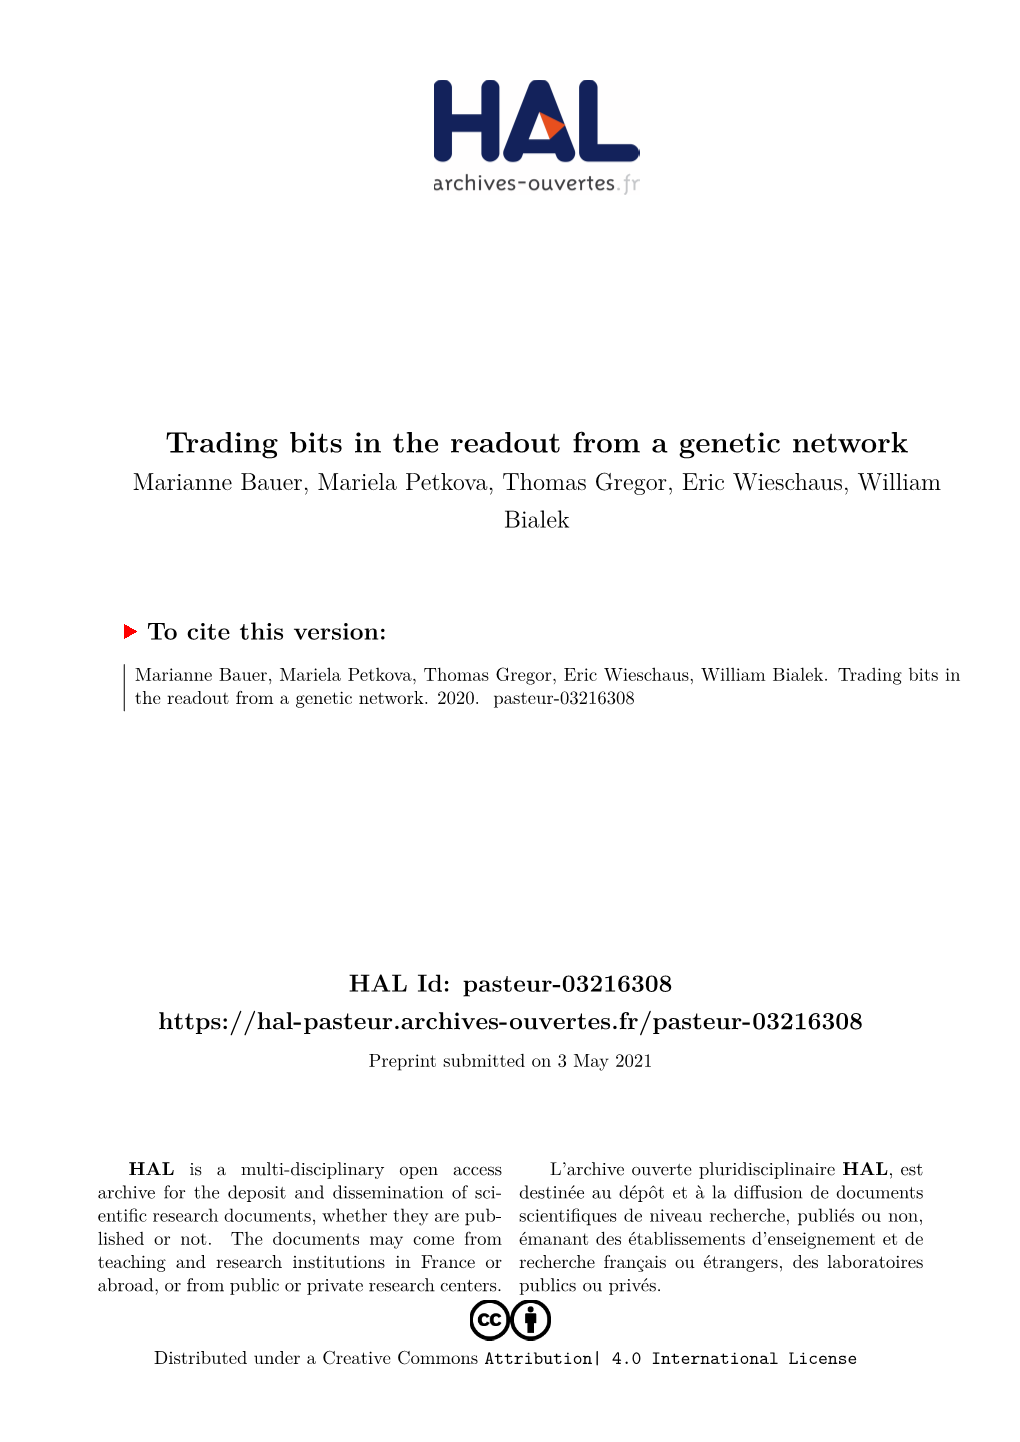 Trading Bits in the Readout from a Genetic Network Marianne Bauer, Mariela Petkova, Thomas Gregor, Eric Wieschaus, William Bialek